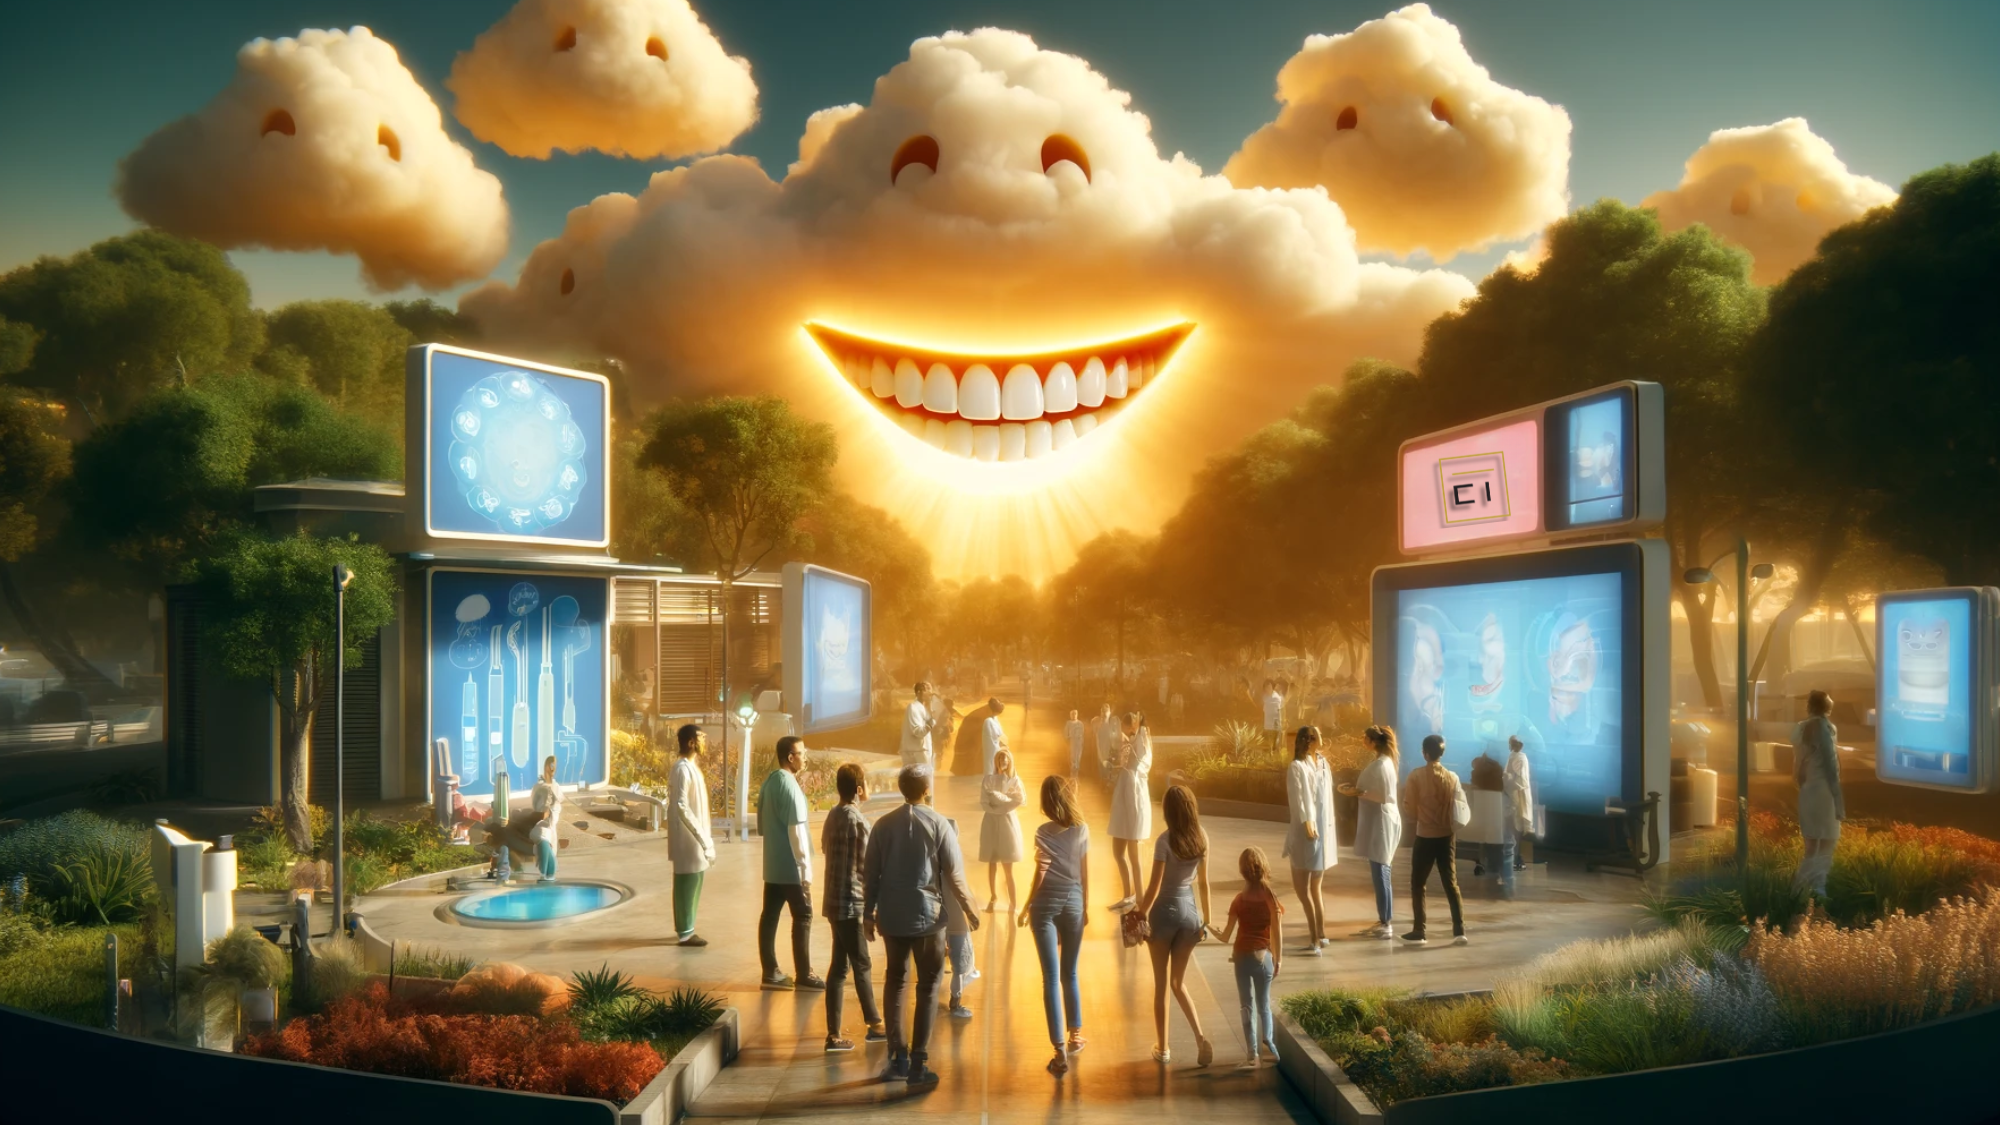 A futureristic park with happy people, dental info displays, and clouds with smiling faces in a sunny sky.